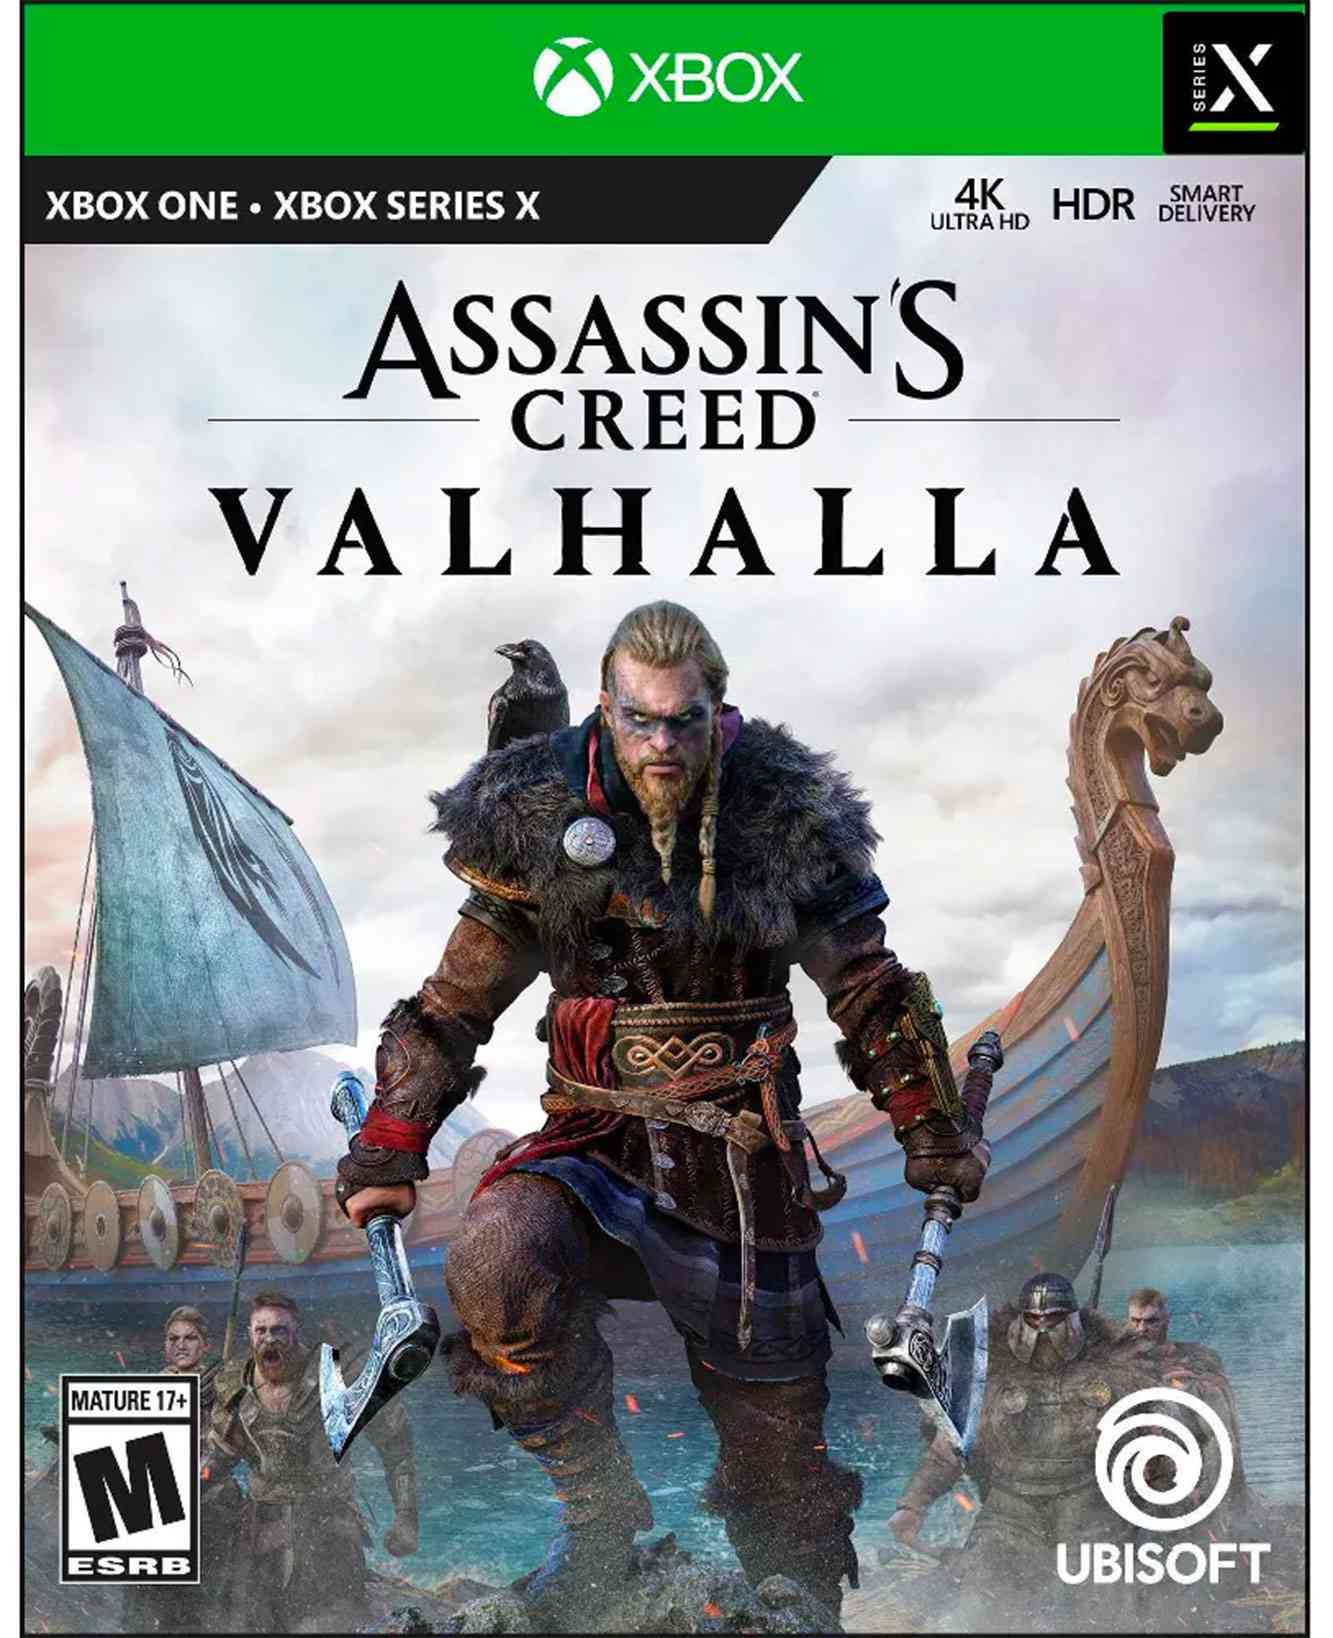 Assassin's Creed: Valhalla - Xbox One